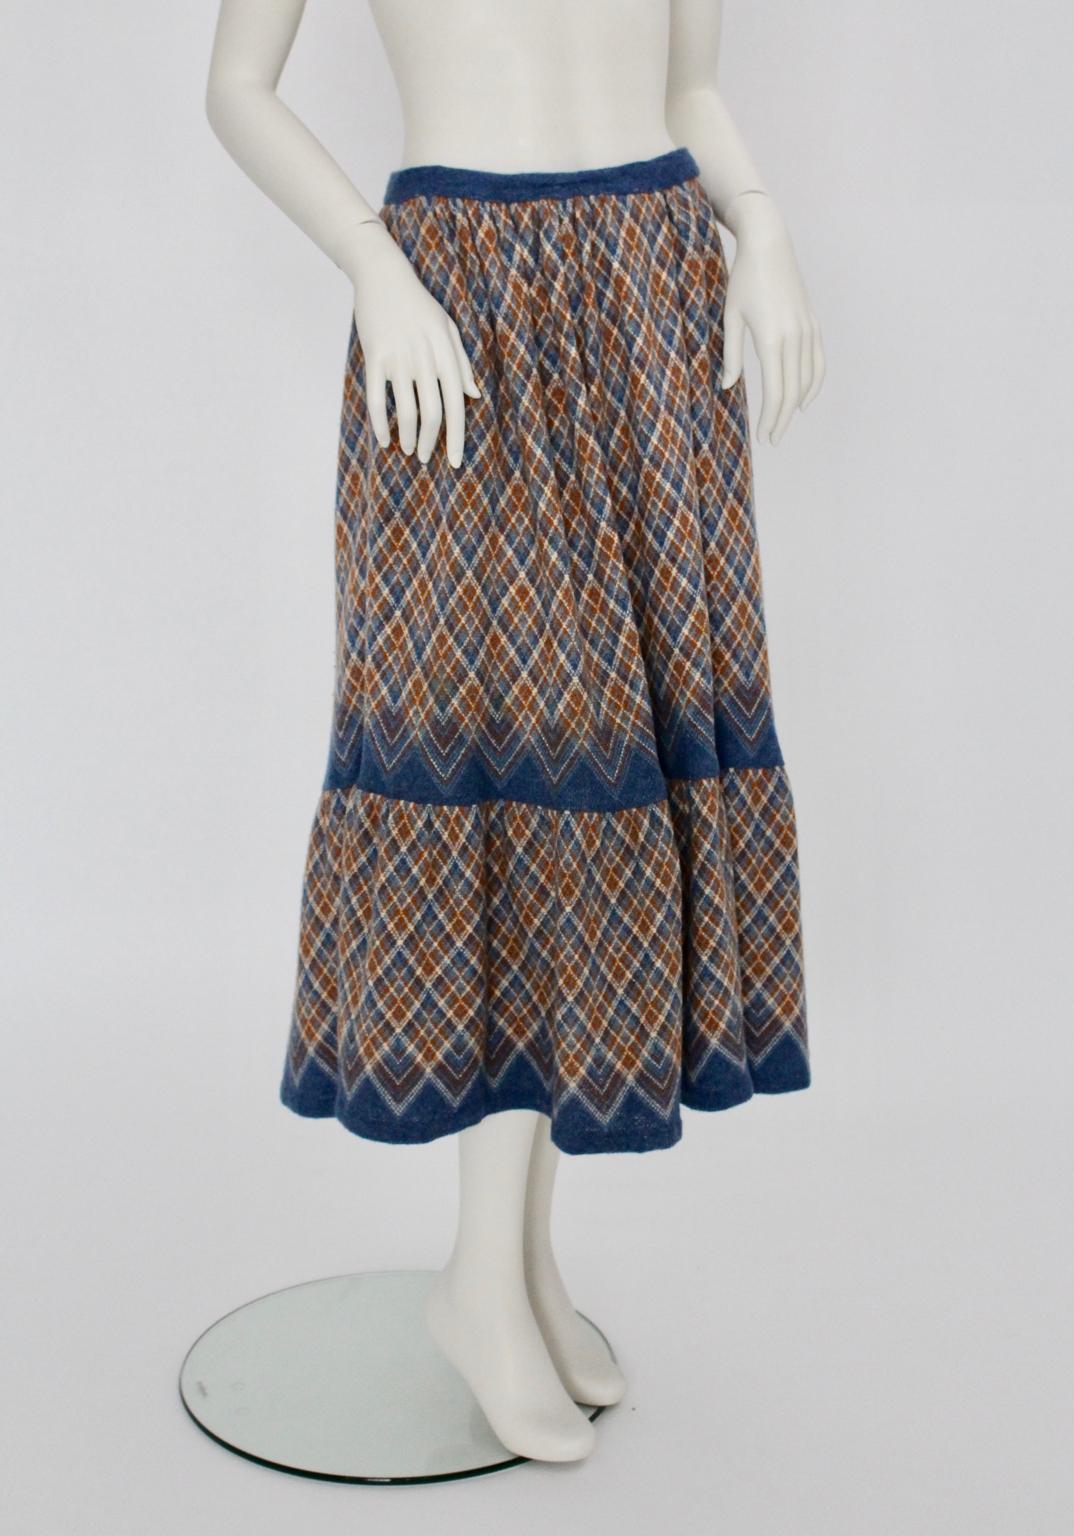 This woolen midi skirt bohemian style from the 1970s features two side pockets and one tier ruffle.
Zip closure
The colors are. blue, brown and cream-white
Fit for small / medium
Professionally cleaned